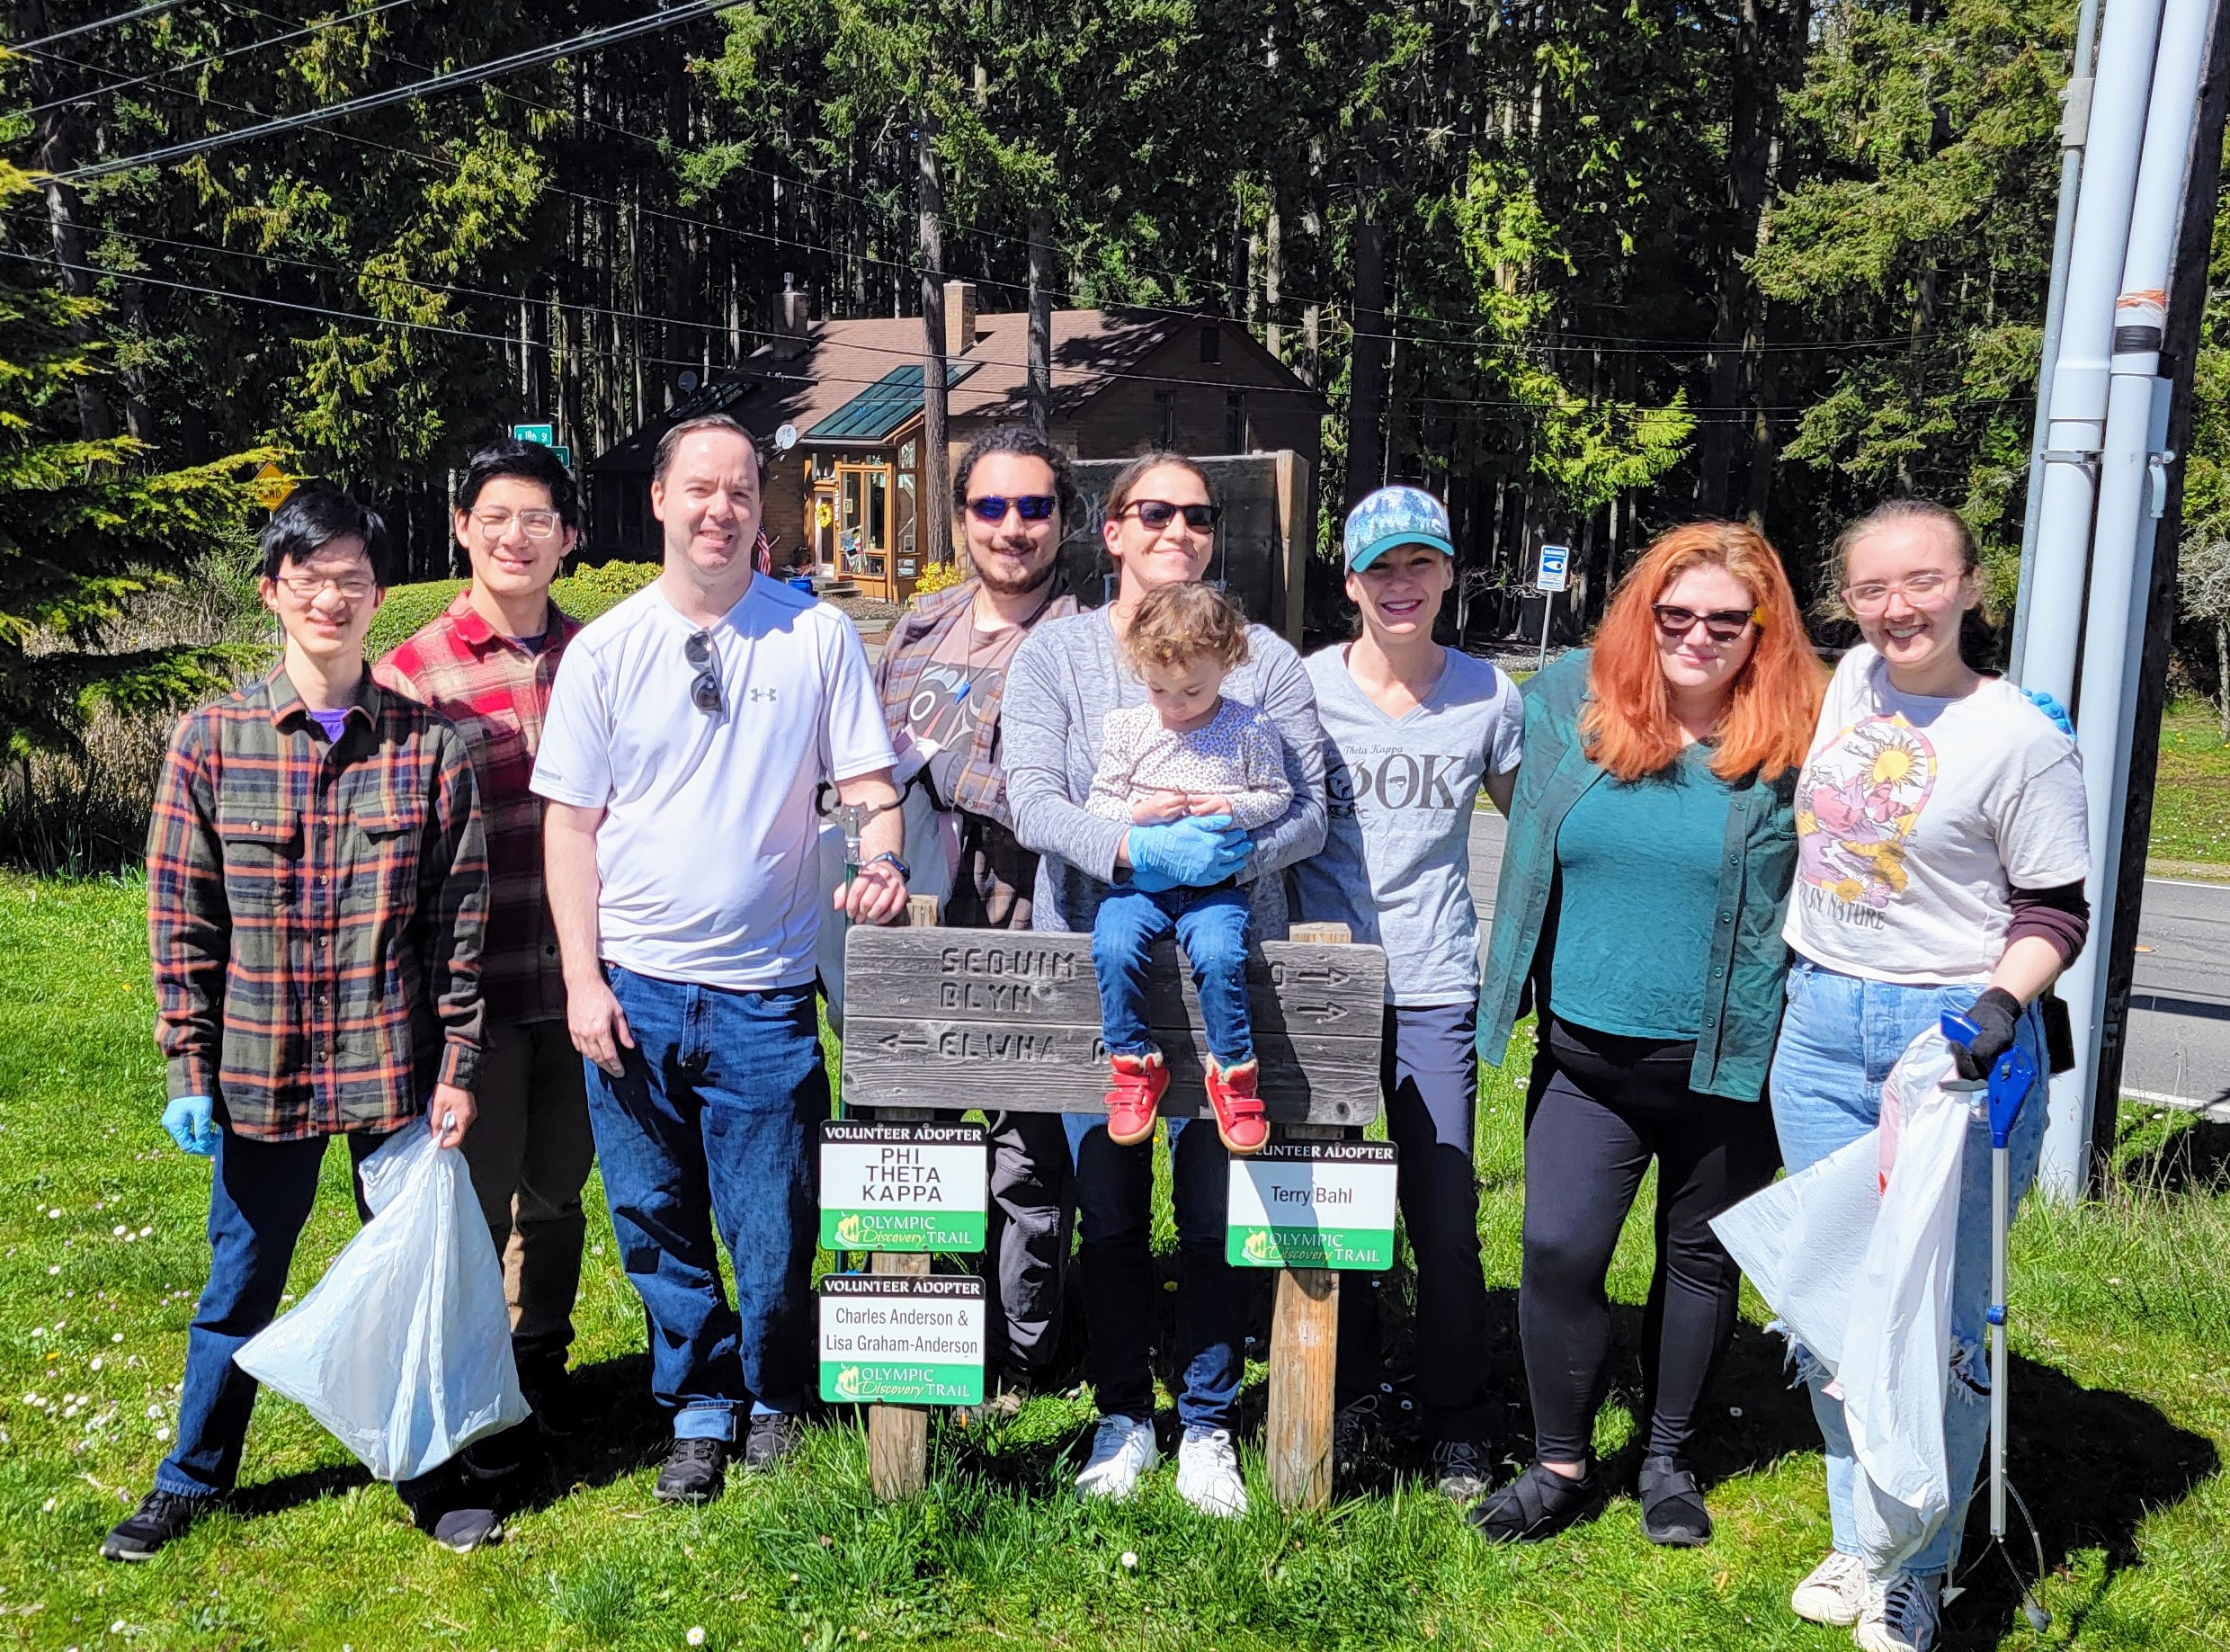 Members of PC's Phi Theta Kappa chapter clean up the Olympic Discovery Trail